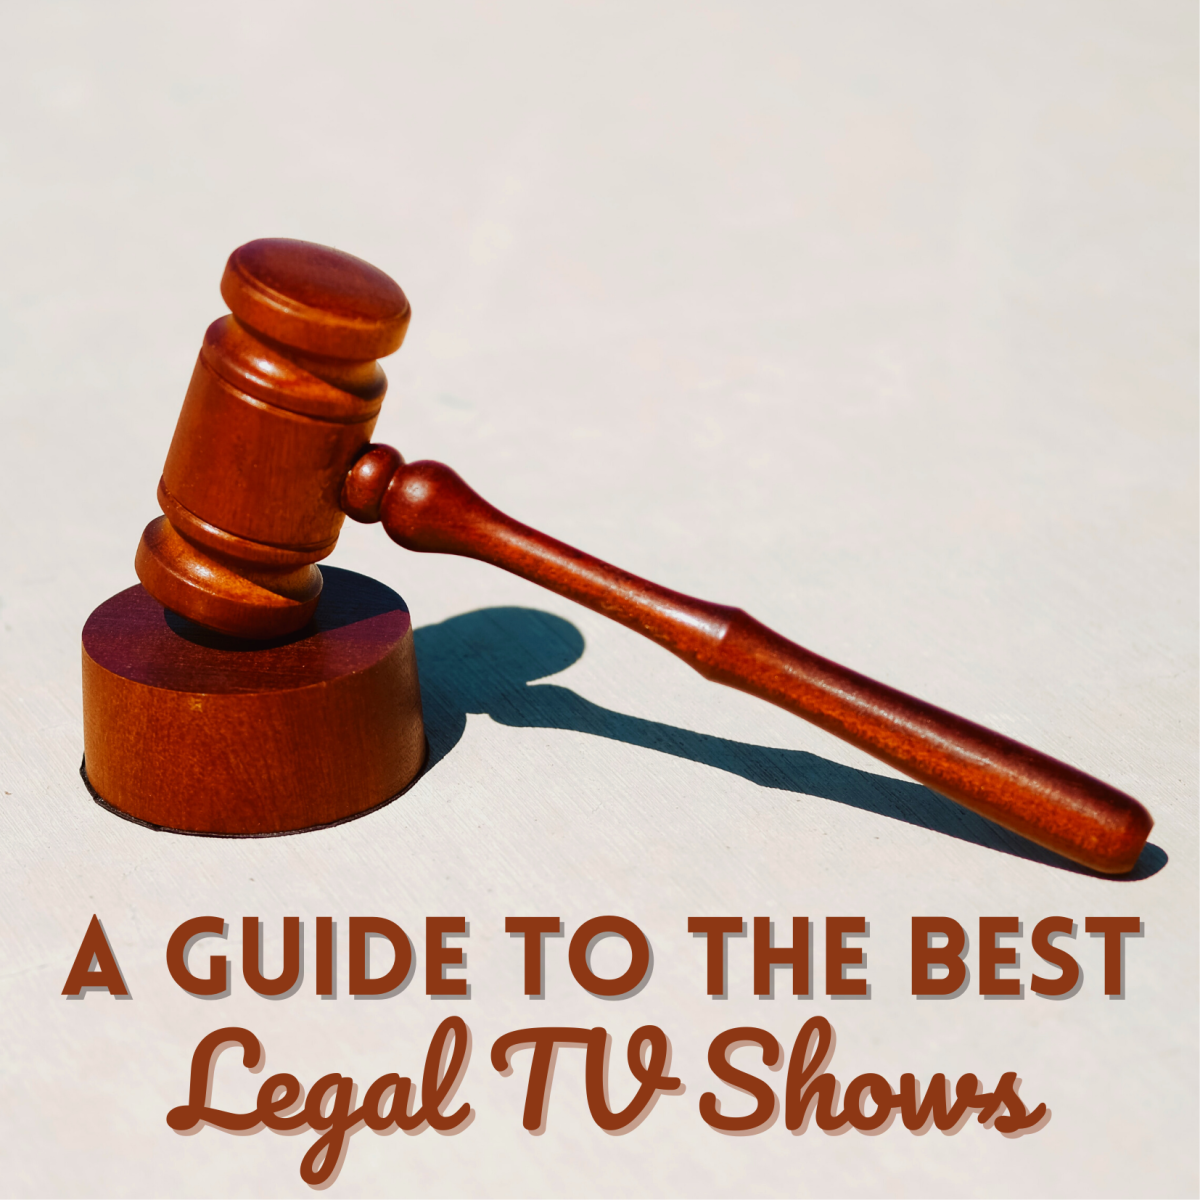 Best Legal TV Shows: TV Lawyers of the 1960s–2000s